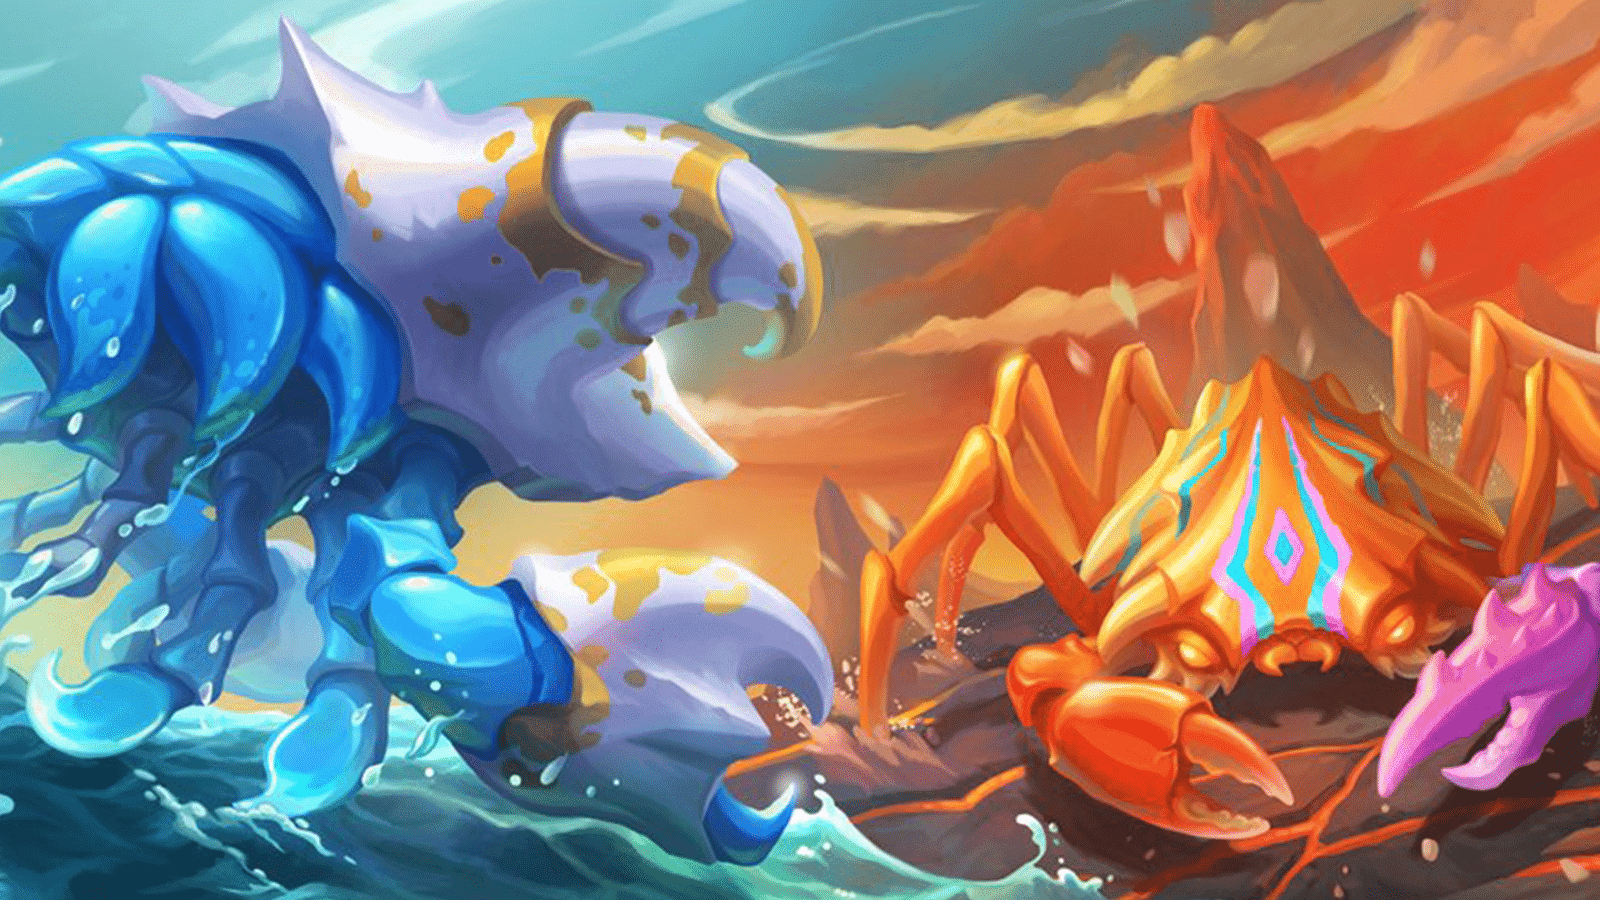 CrypantCrab is an NFT game where gamers can play to earn by creating their own crab NFTs